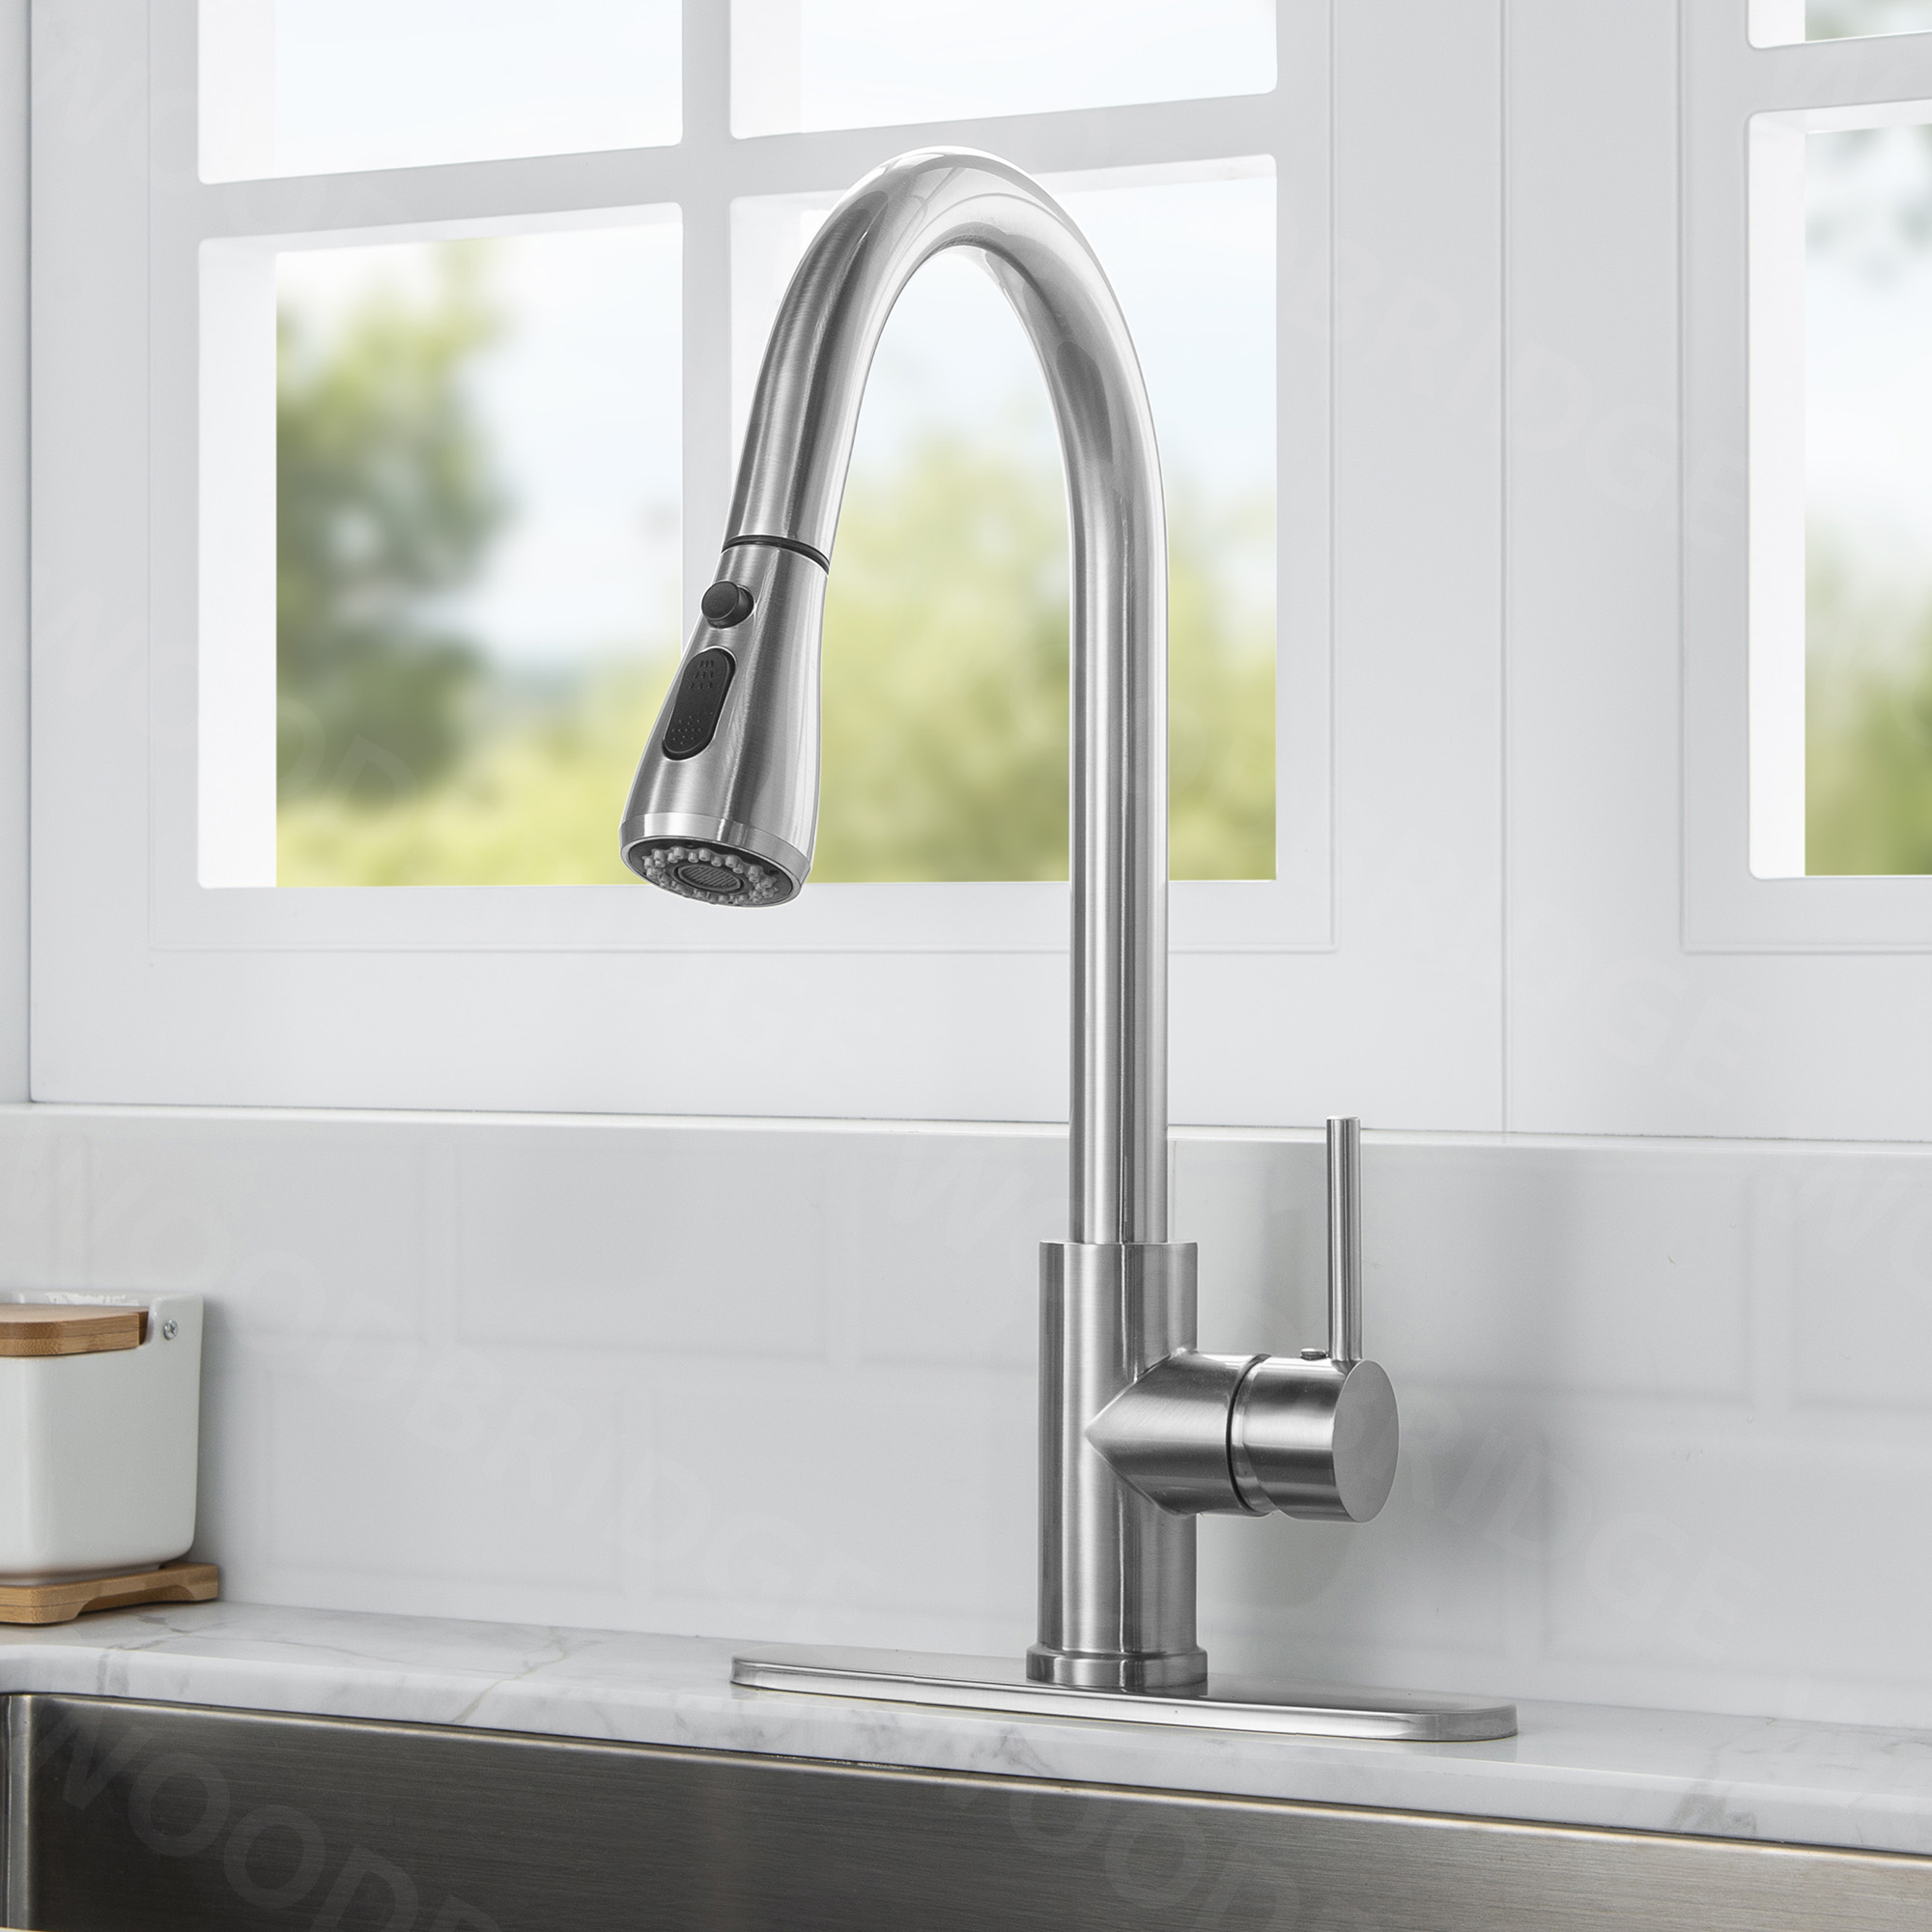 WOODBRIDGE WK090802CH Single Handle Pull Down Kitchen Faucet in Polished Chrome Finish.